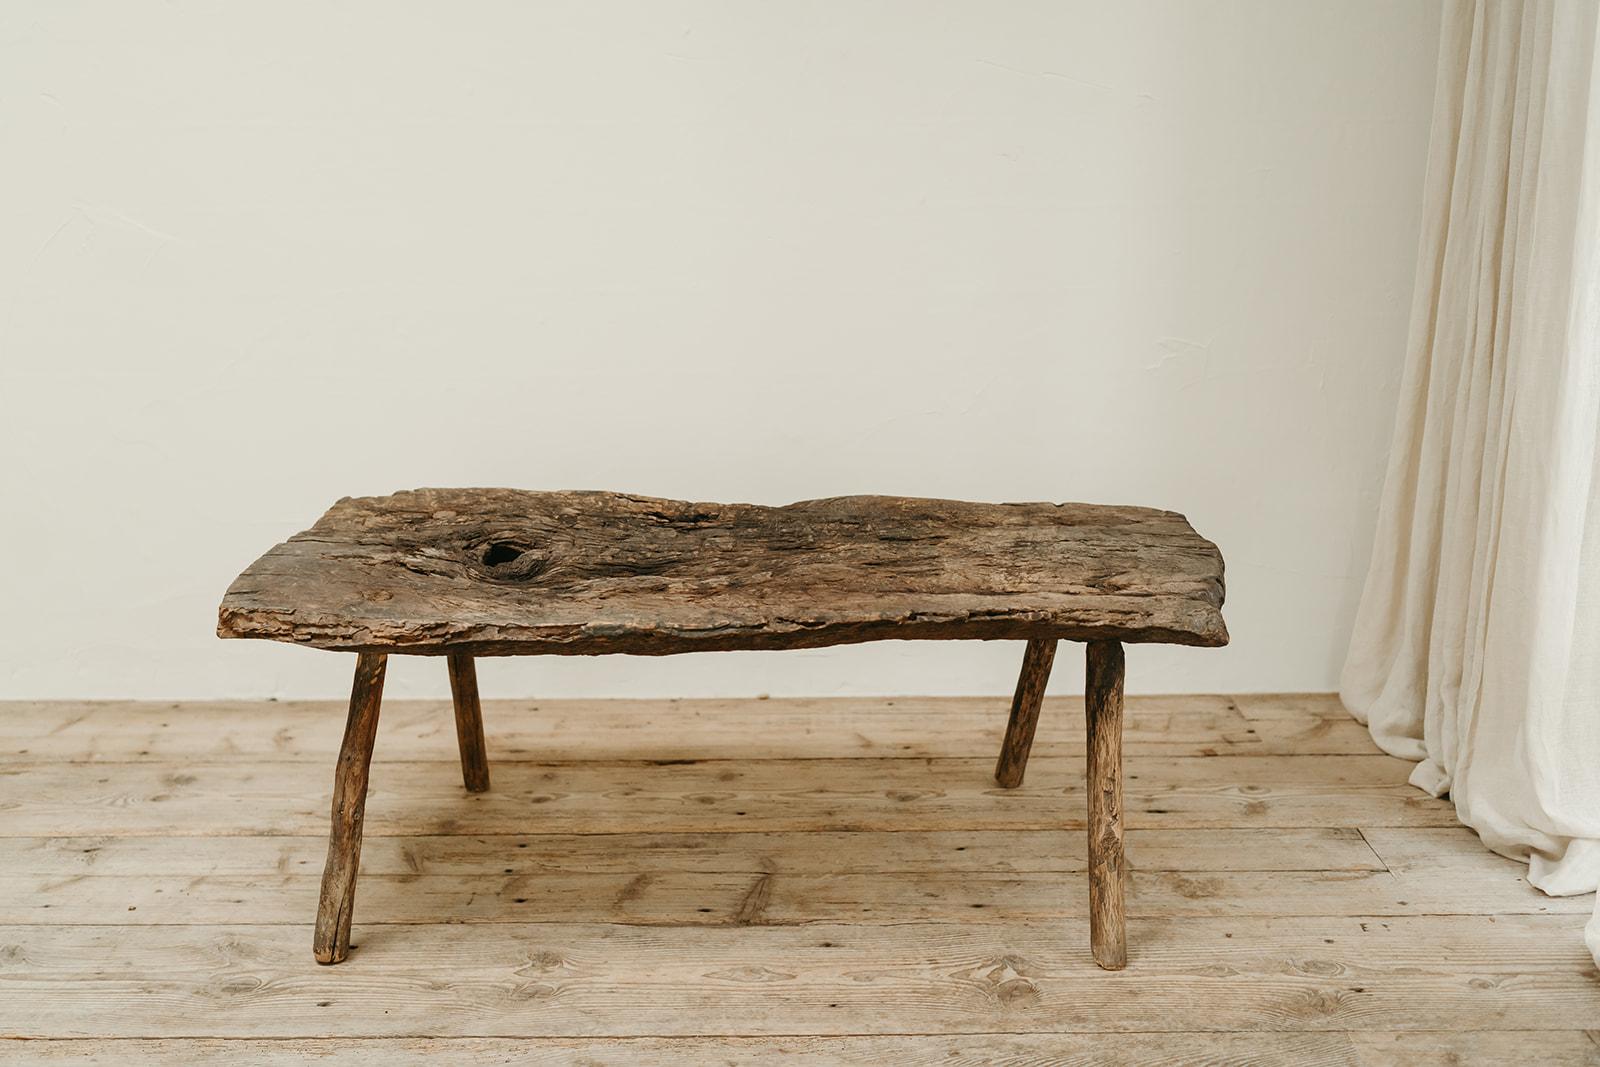 a Spanish chestnut table/bench, lovely patination, dry wood, a sculpture ... 
wabisabi at its best ... 